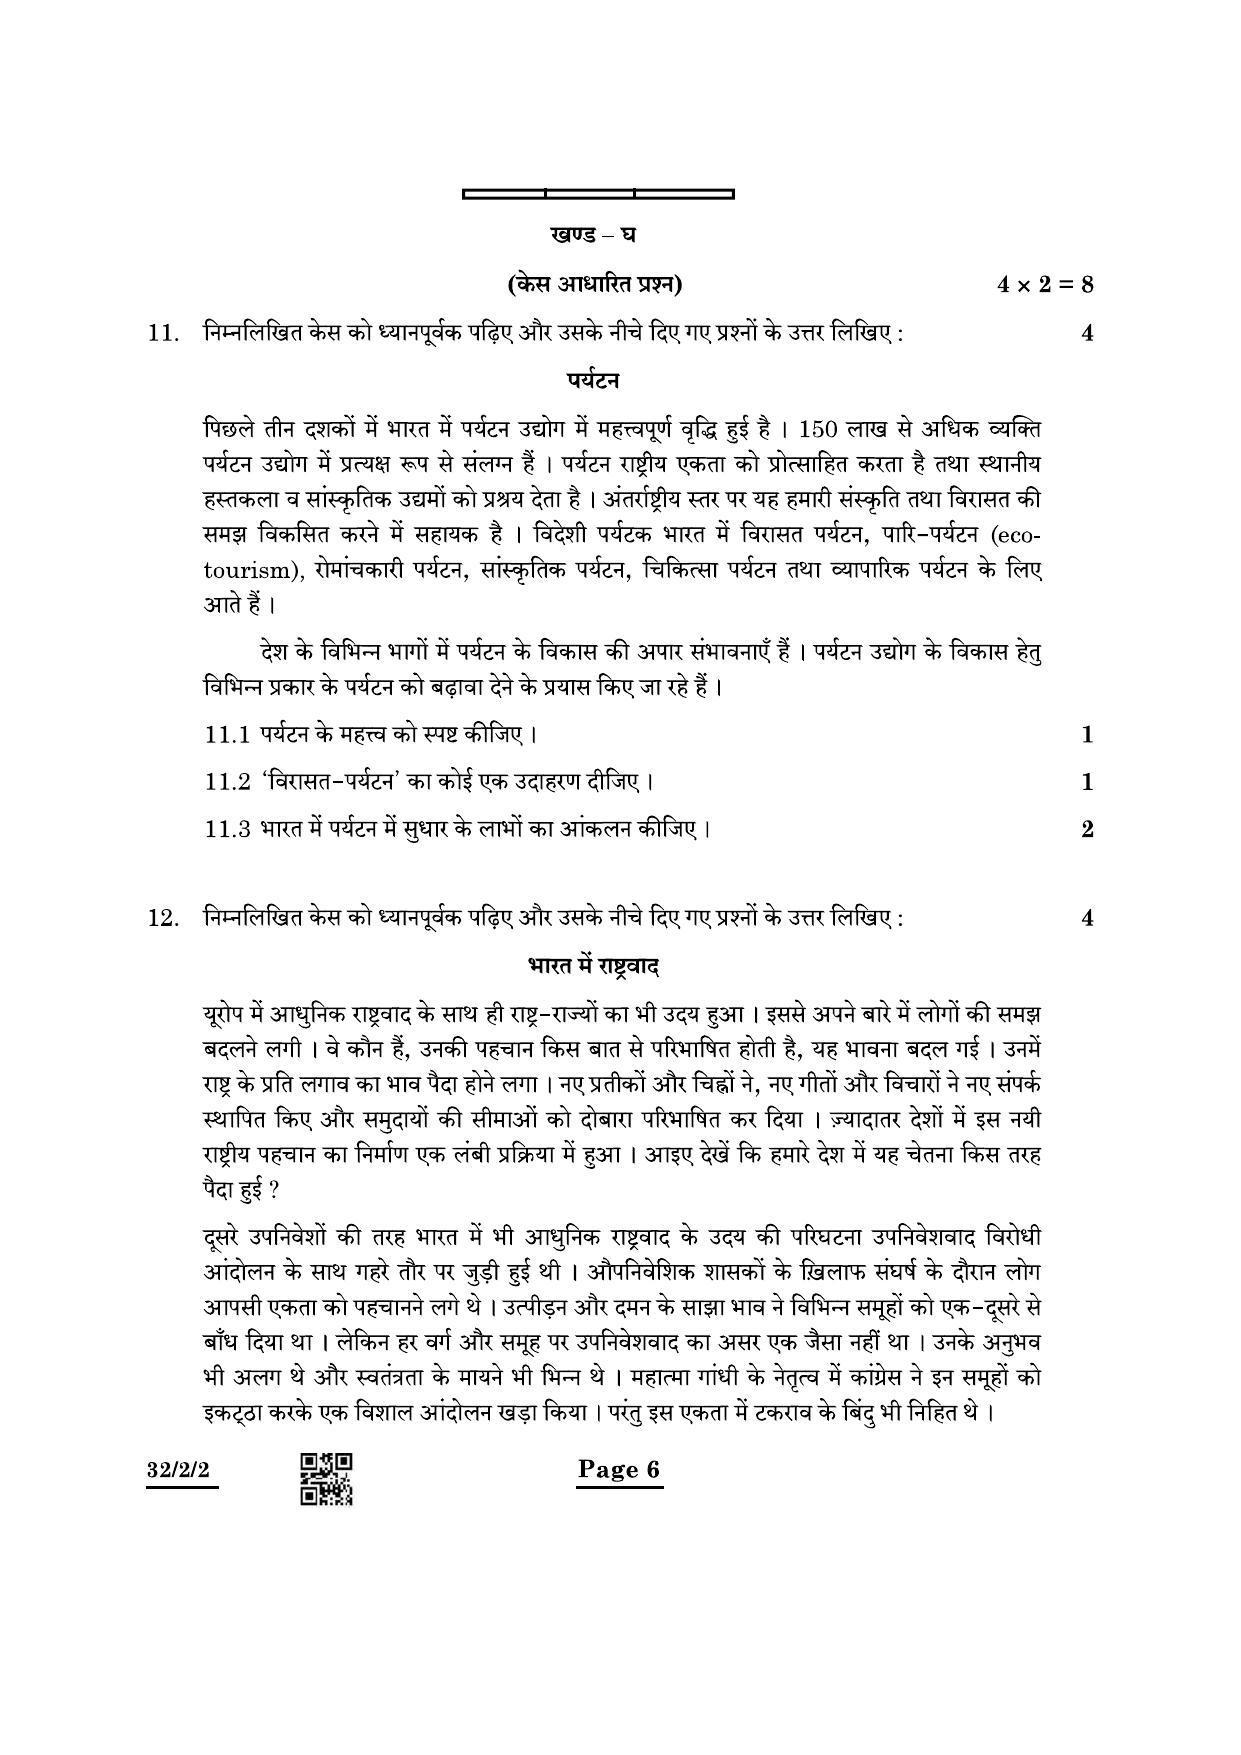 CBSE Class 10 32-2-2 Social Science 2022 Question Paper - Page 6